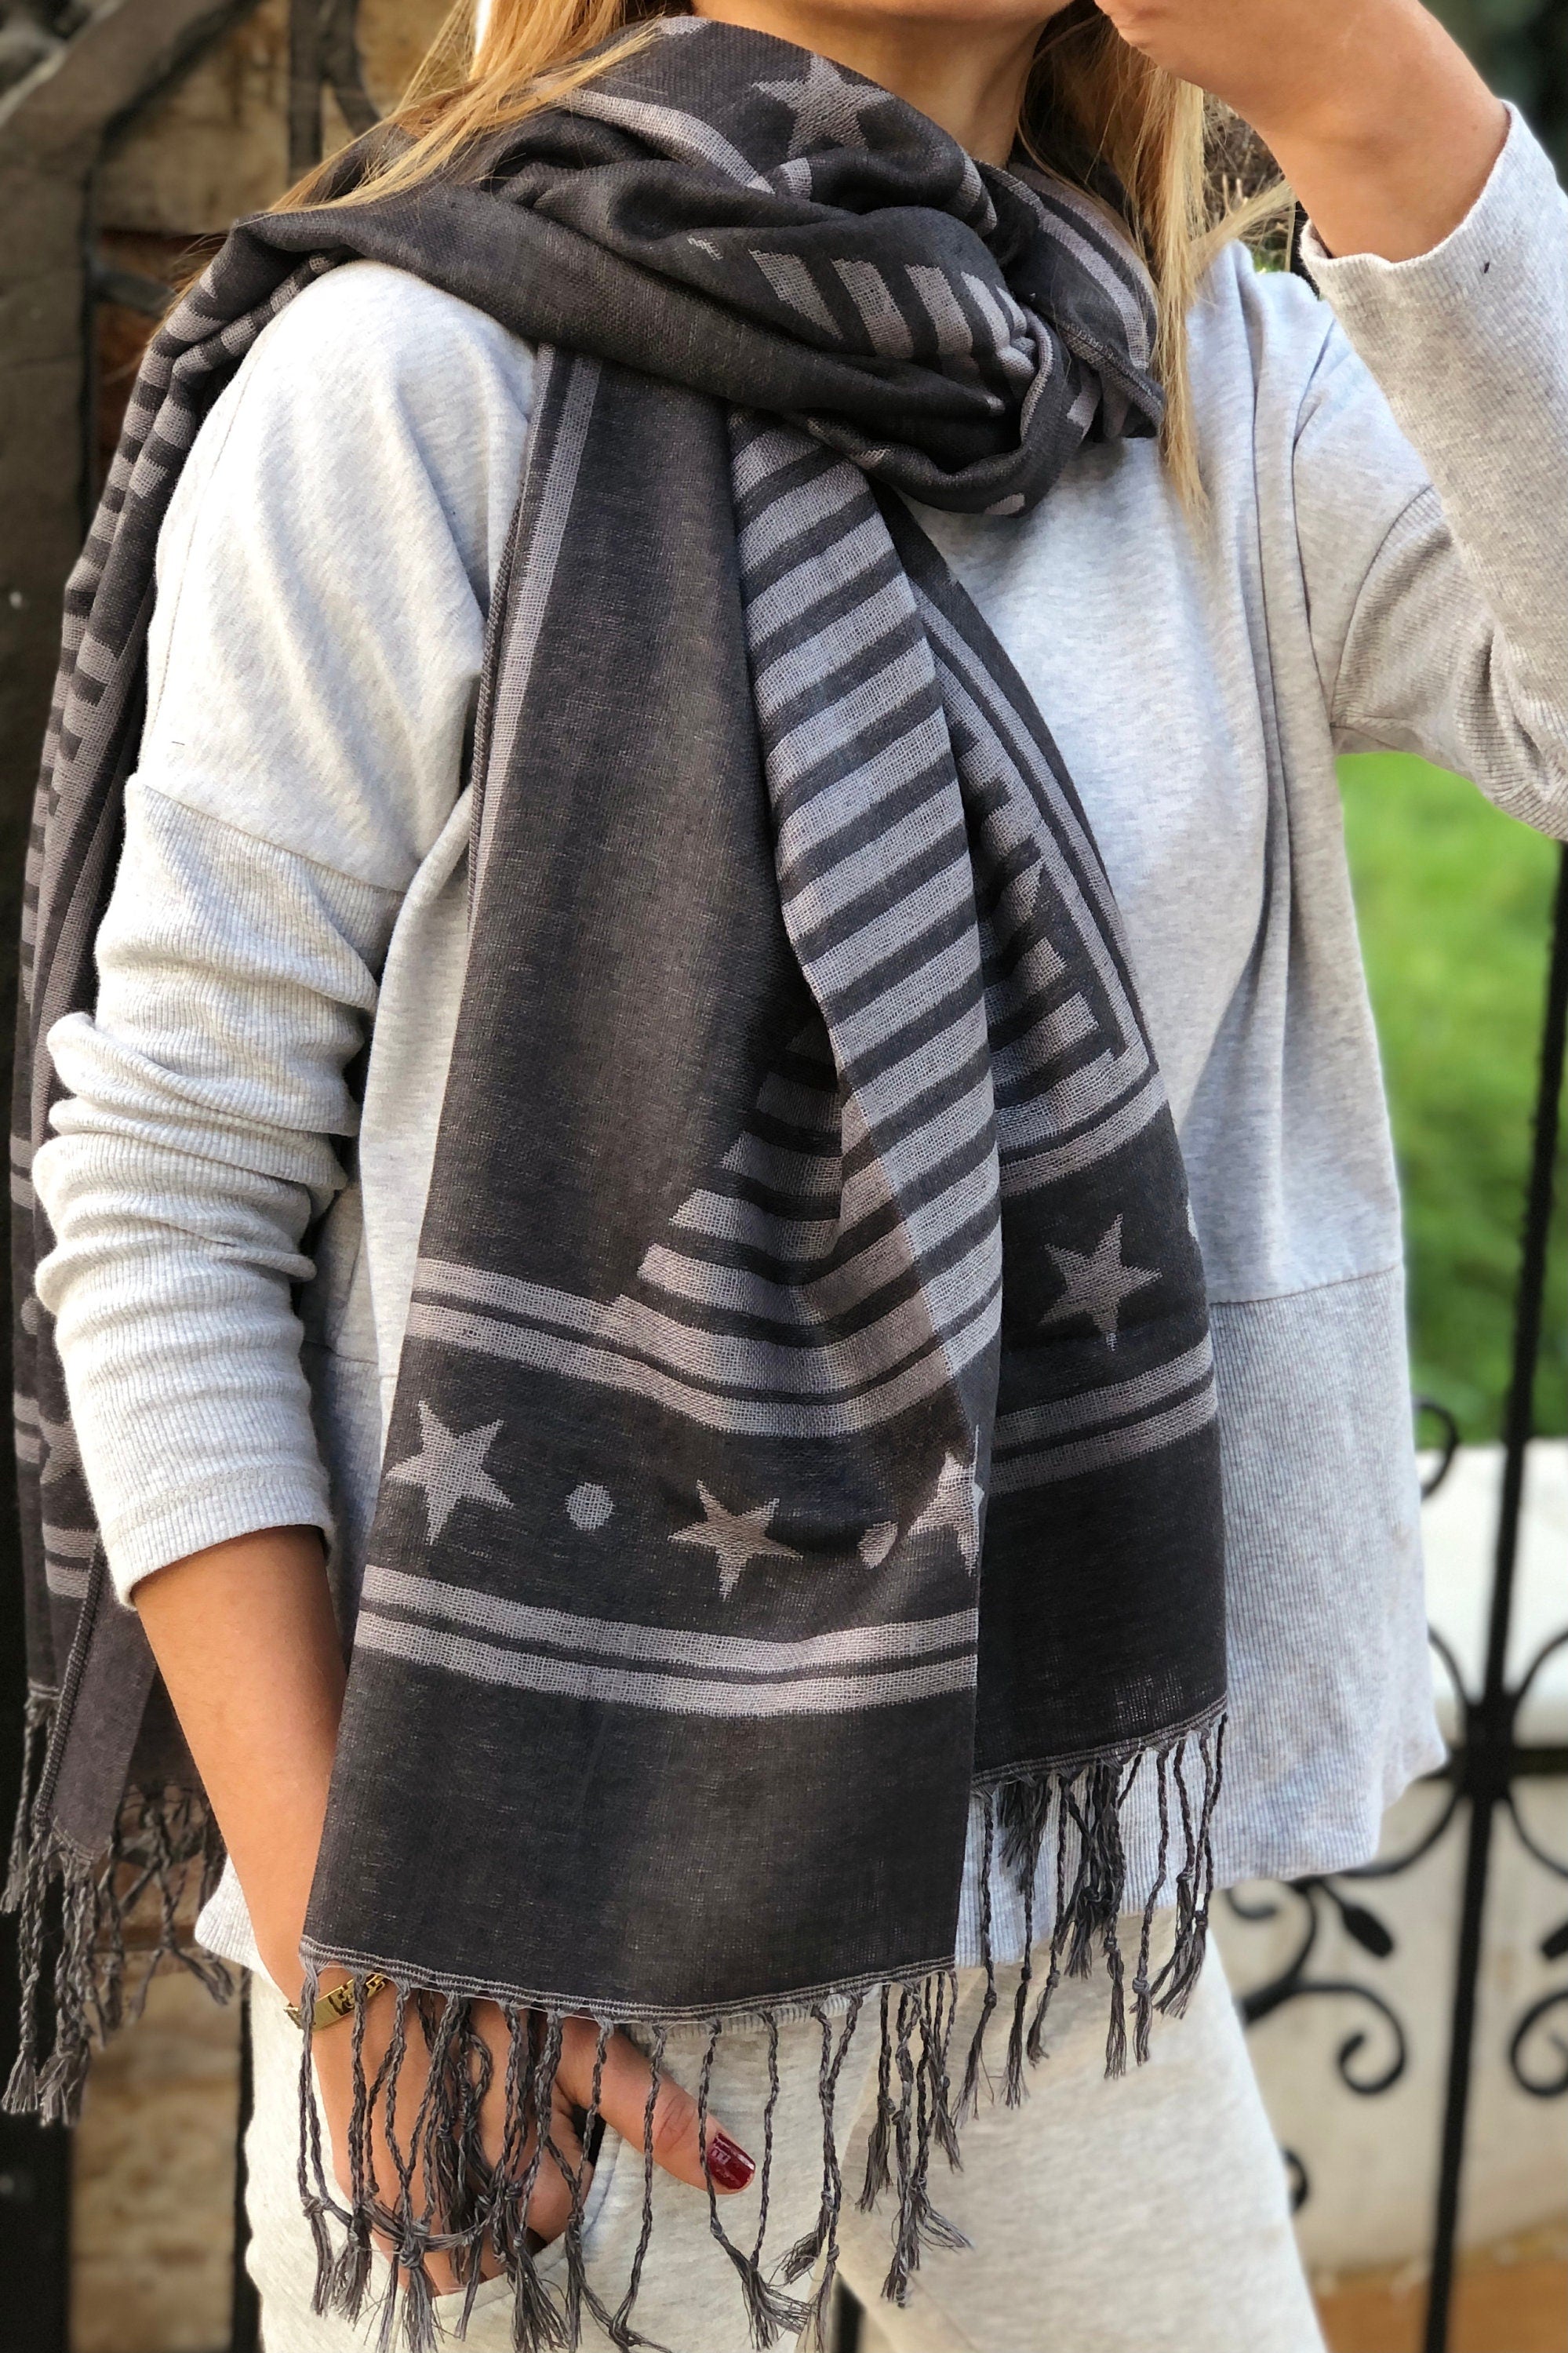 Get ready for the colder months with this soft and comfortable Anthracite Gray Scarf, ideal for layering.